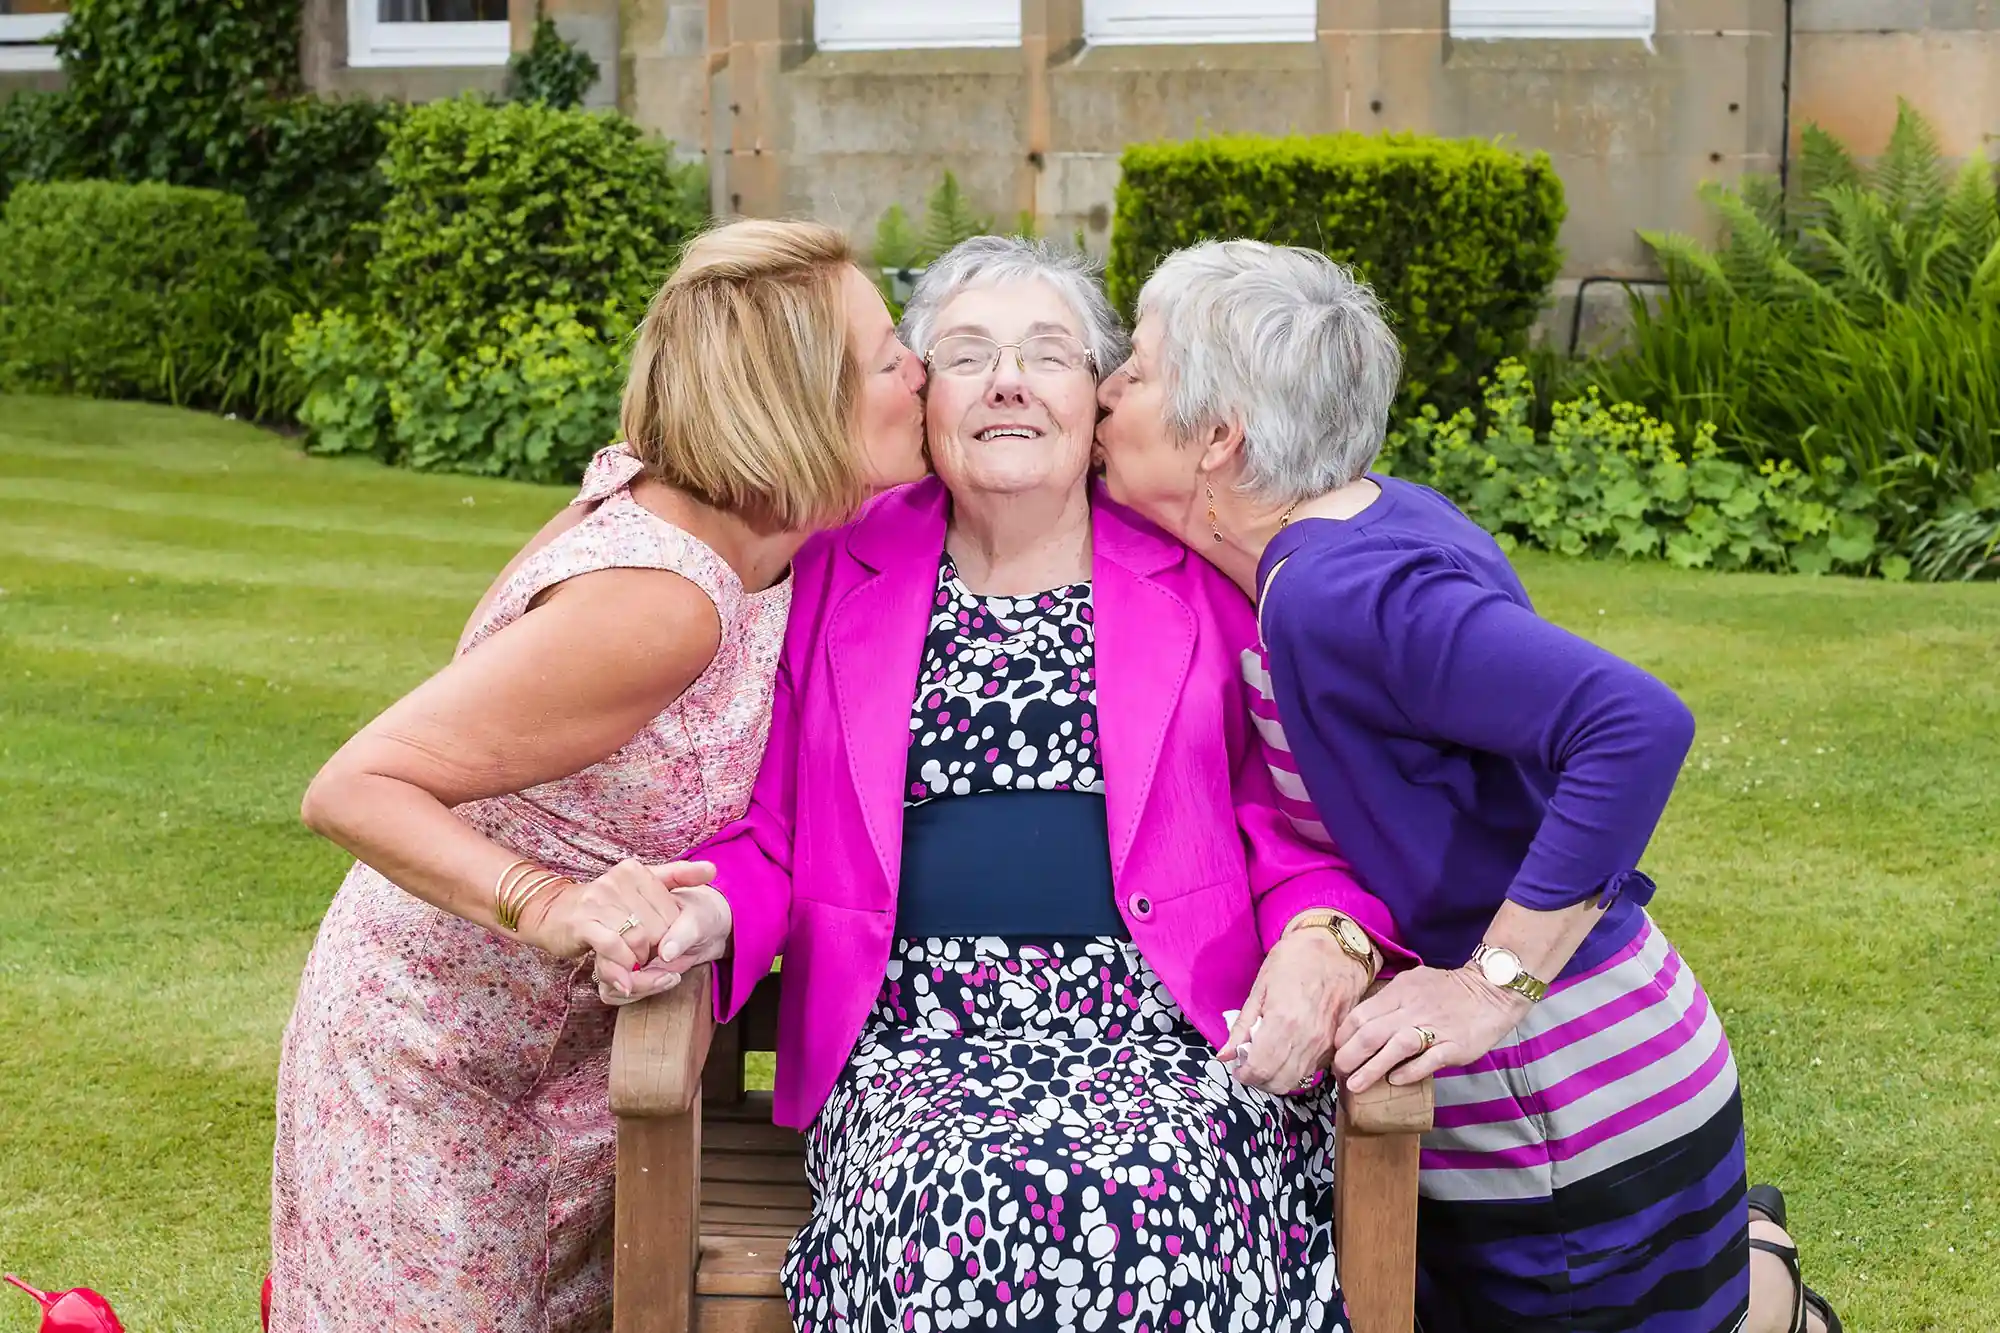 Three elderly women are sitting on a wooden bench in a garden. The woman in the center is being kissed on the cheeks by the women on either side. All are smiling.